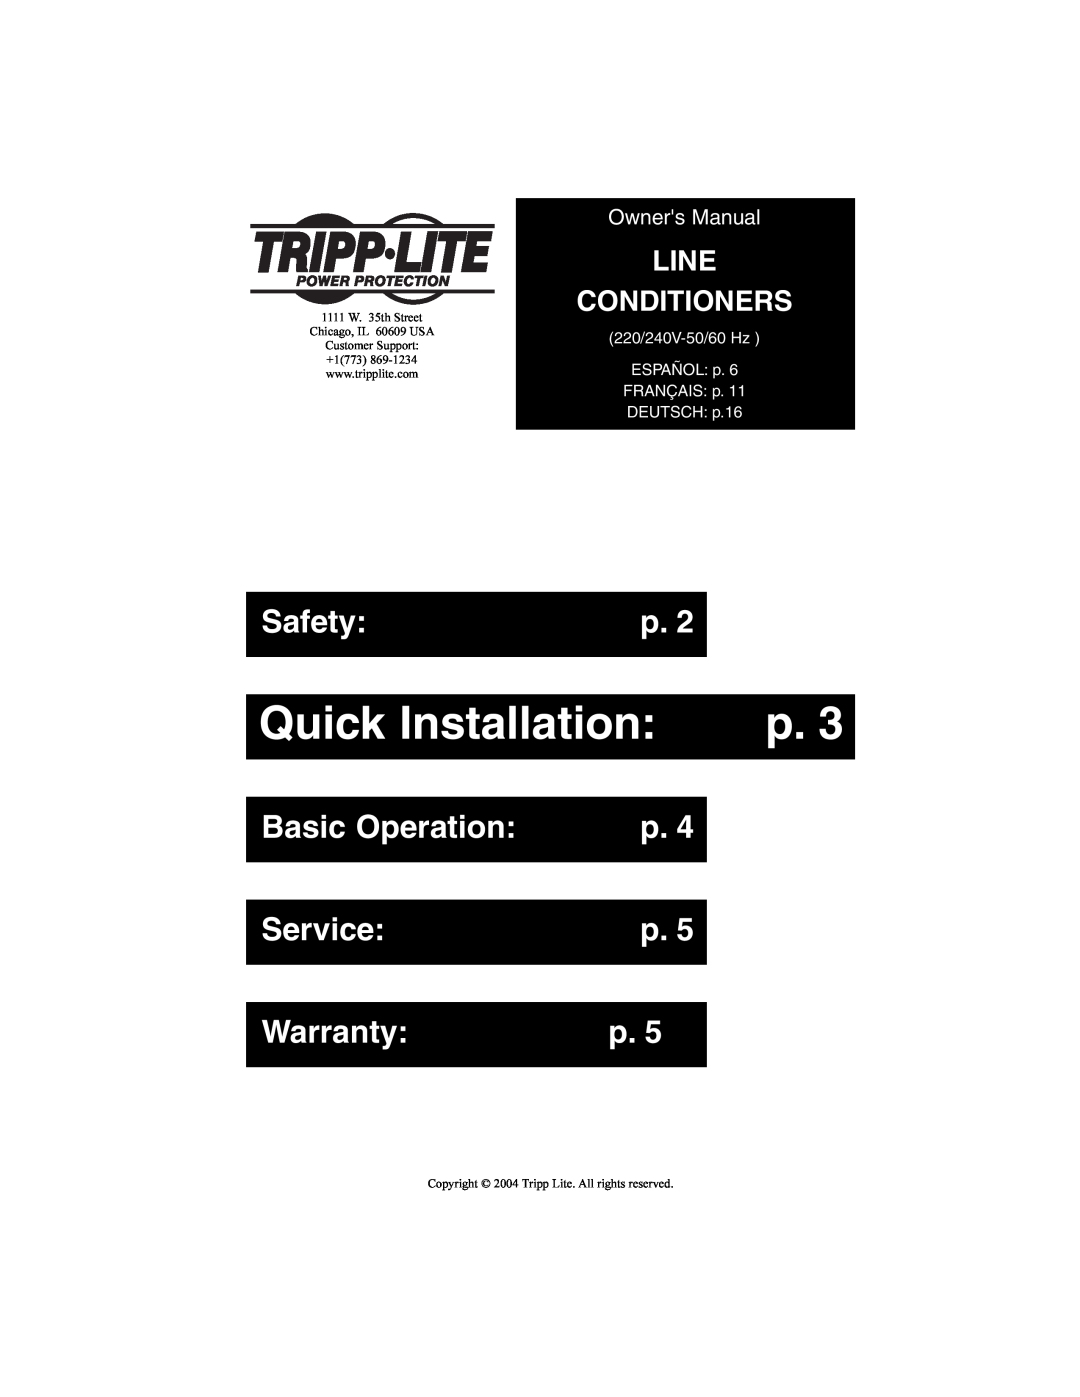 Tripp Lite 93-2268_EN owner manual Quick Installation, Safety, Basic Operation, Service, Warranty, Line Conditioners 